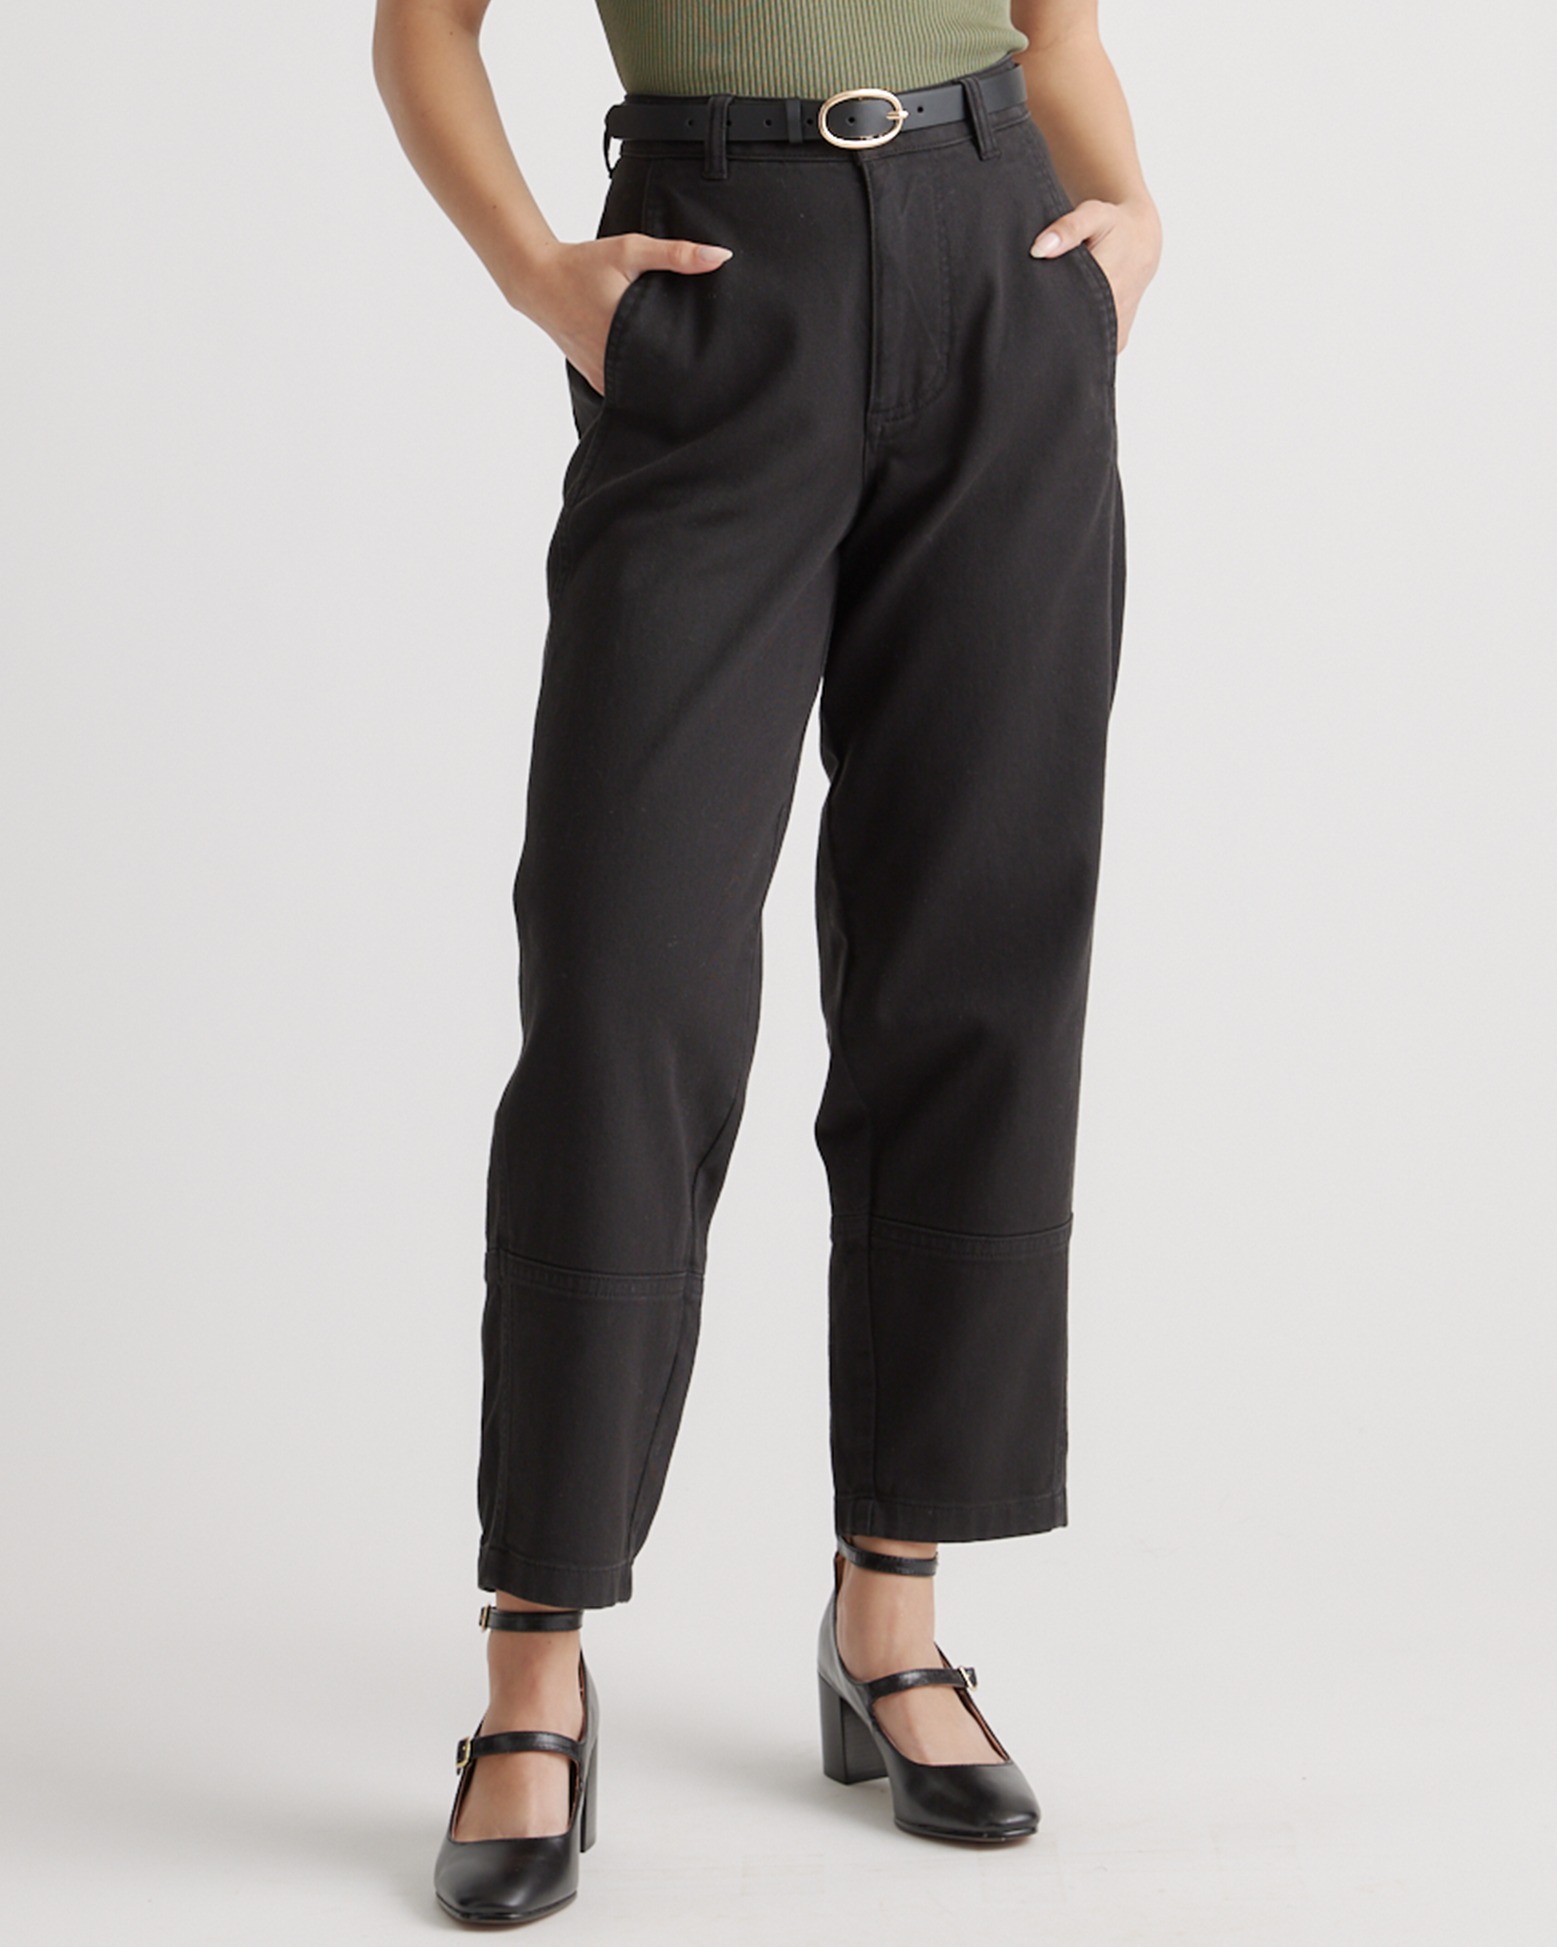 Bamboo / Organic Cotton Relax Pants - XL Only